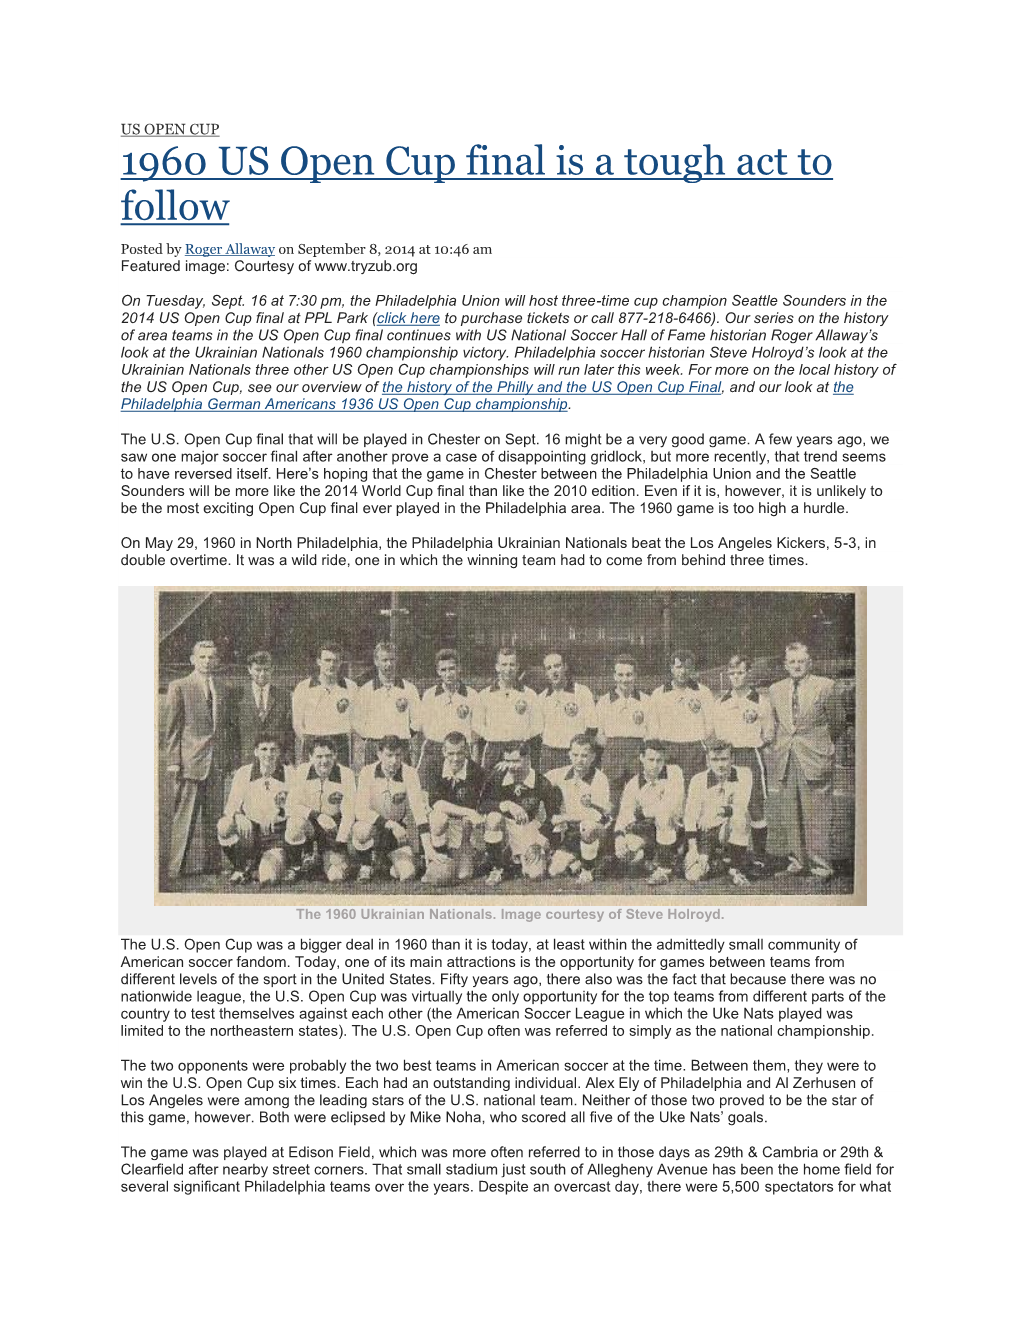 1960 US Open Cup Final Is a Tough Act to Follow Posted by Roger Allaway on September 8, 2014 at 10:46 Am Featured Image: Courtesy Of